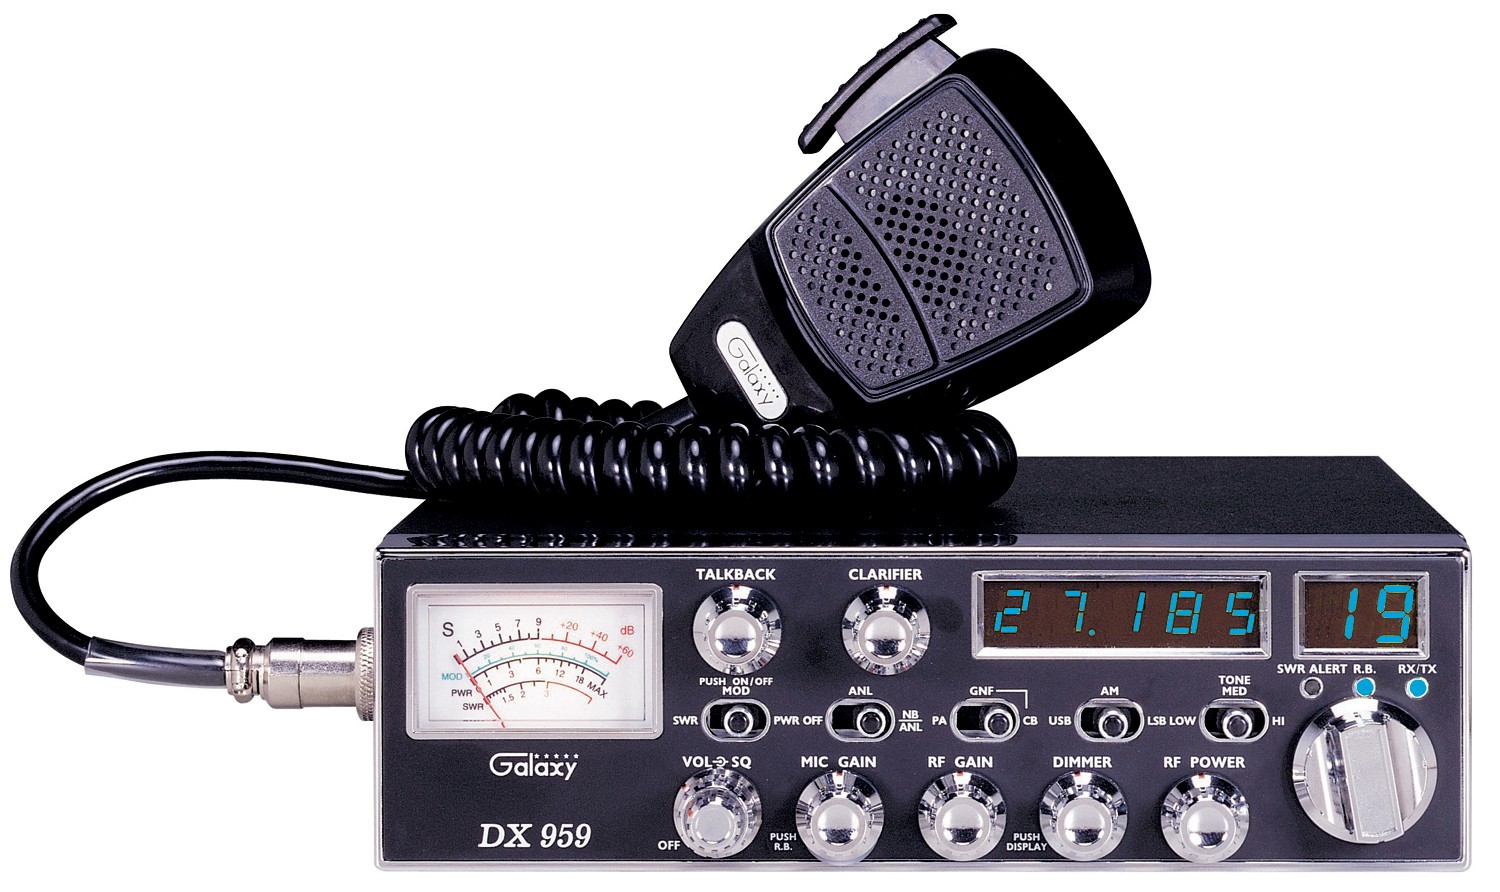 Galaxy Am/Ssb 40 Channel Deluxe Cb Radio With 5 Digit Frequency Display, Talkback, Roger Beep, Variable Power & Blue Led Display